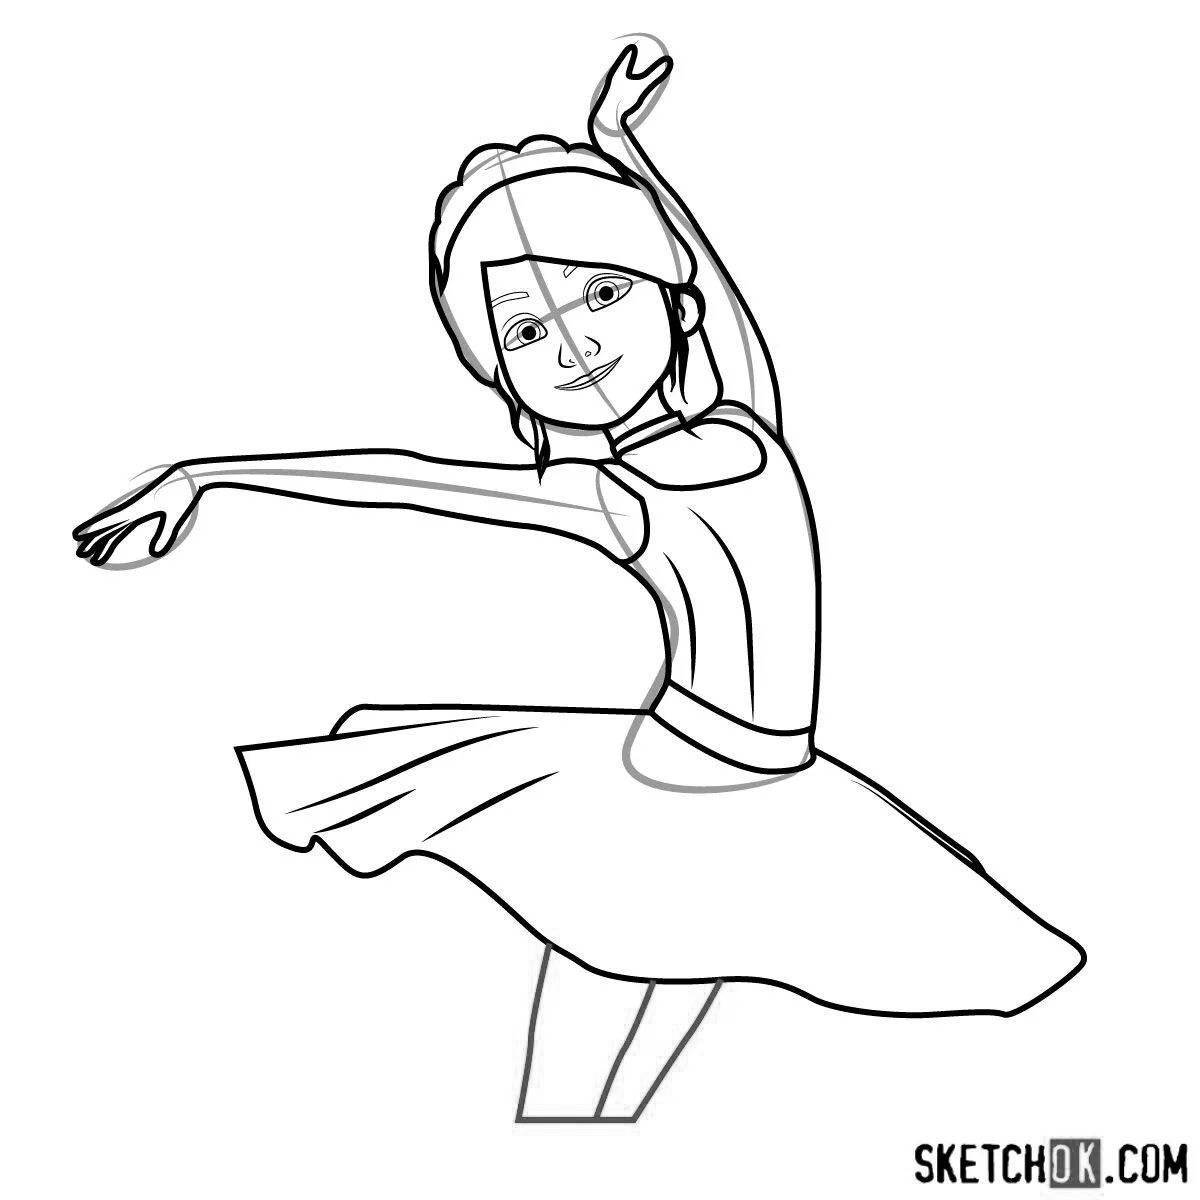 Animated ballerina coloring page